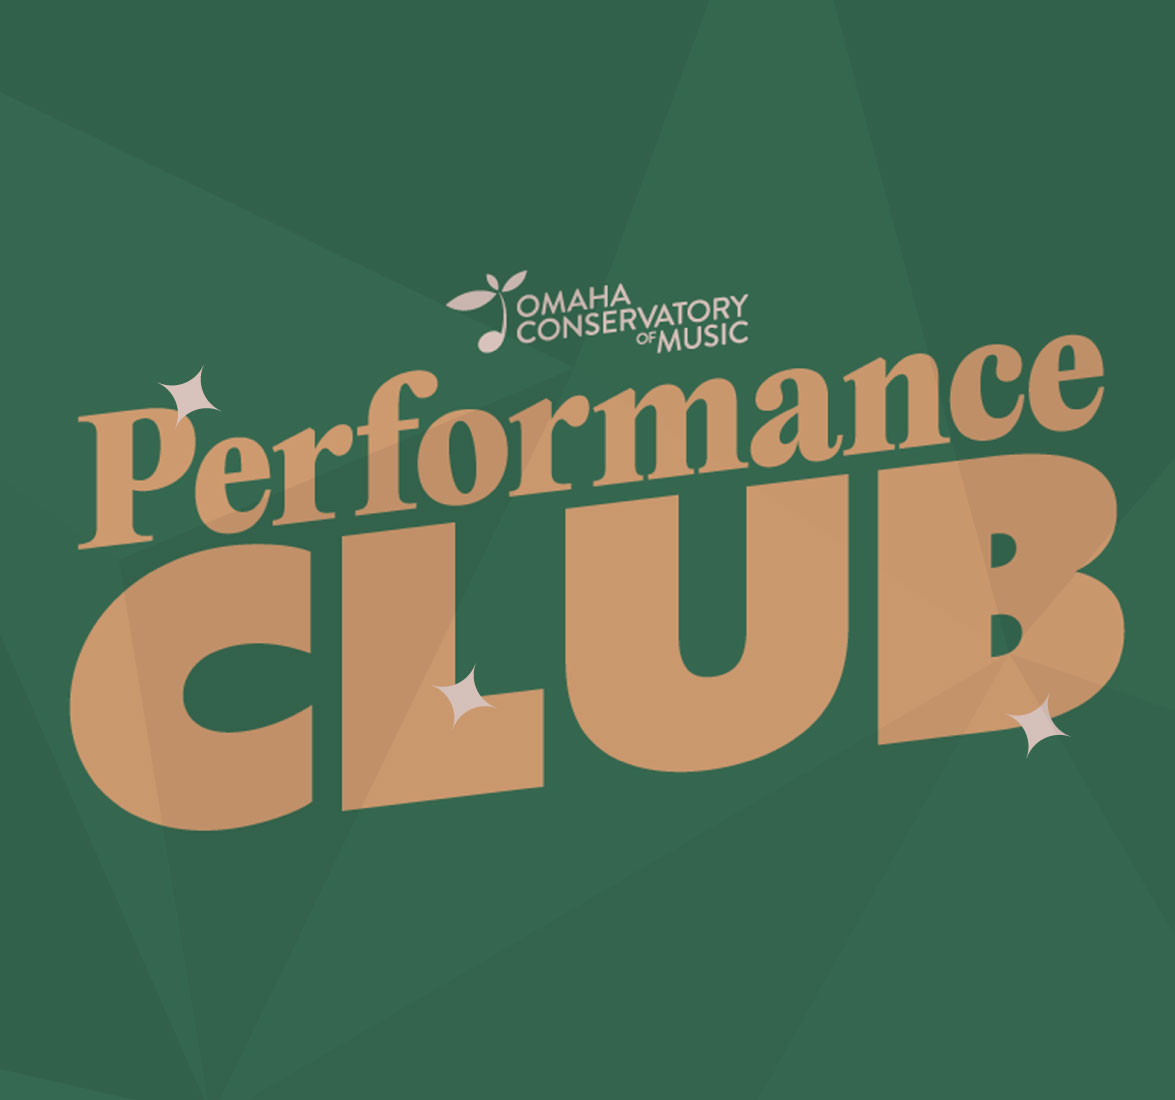 Gold text on a green background reading: "Omaha Conservatory of Music Performance Club"